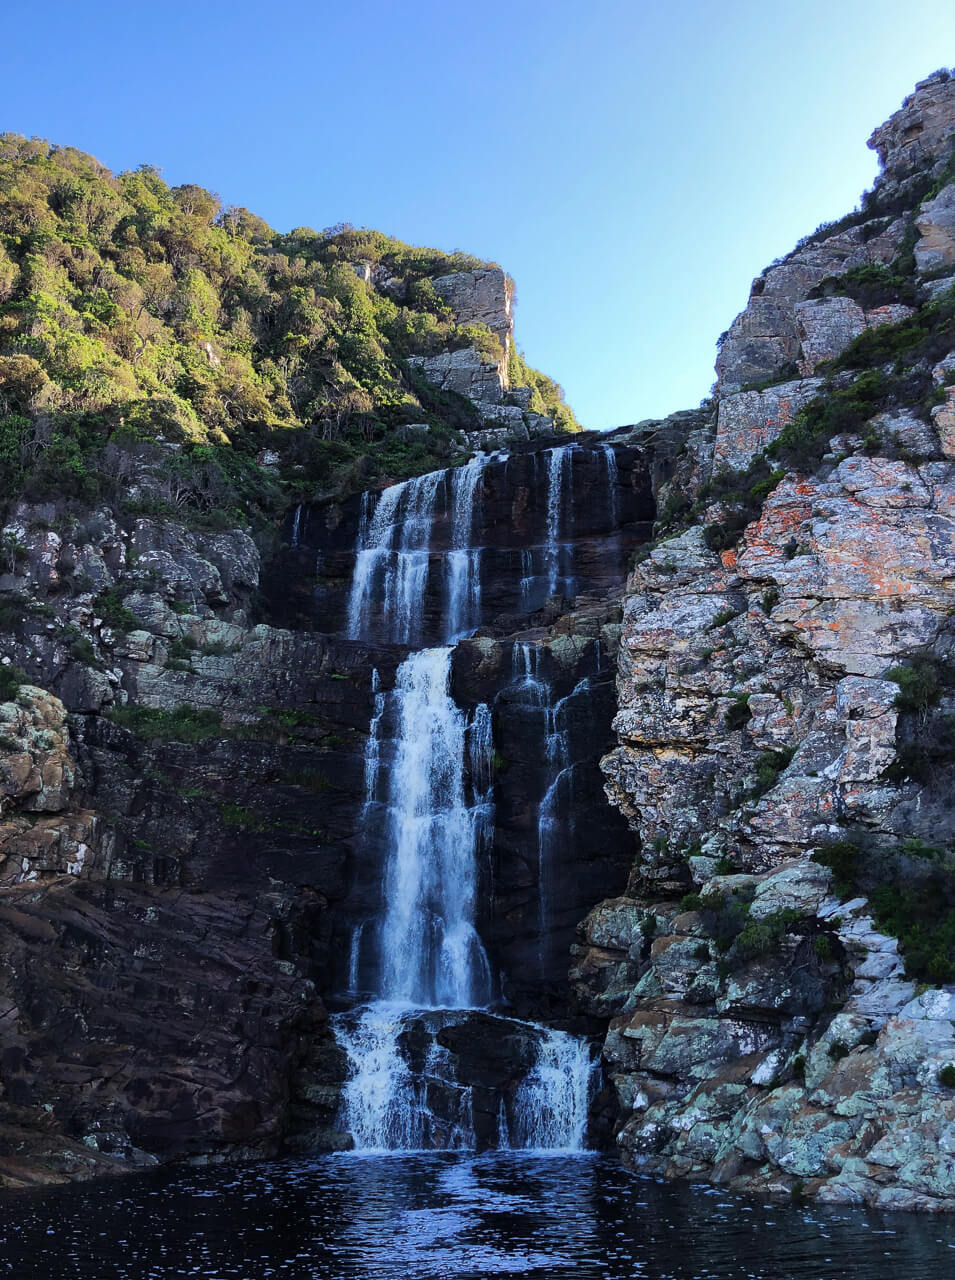 The waterfall at the end of the waterfall hike in Storms River in Tsitsikamma National Park